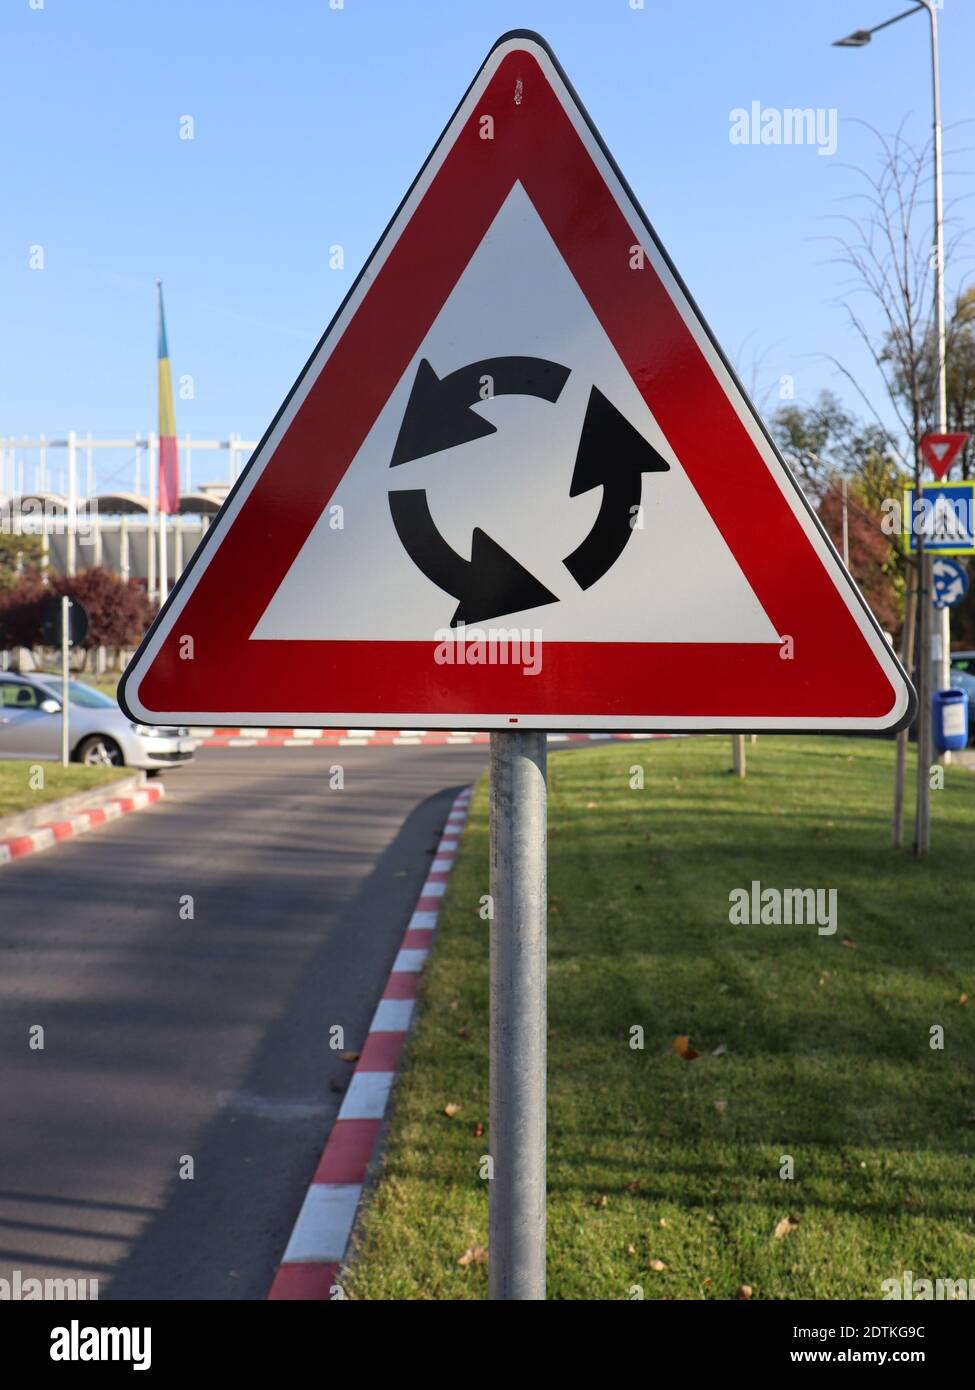 A Vertical Shot Of The Circular Intersection Road Traffic Sign On The